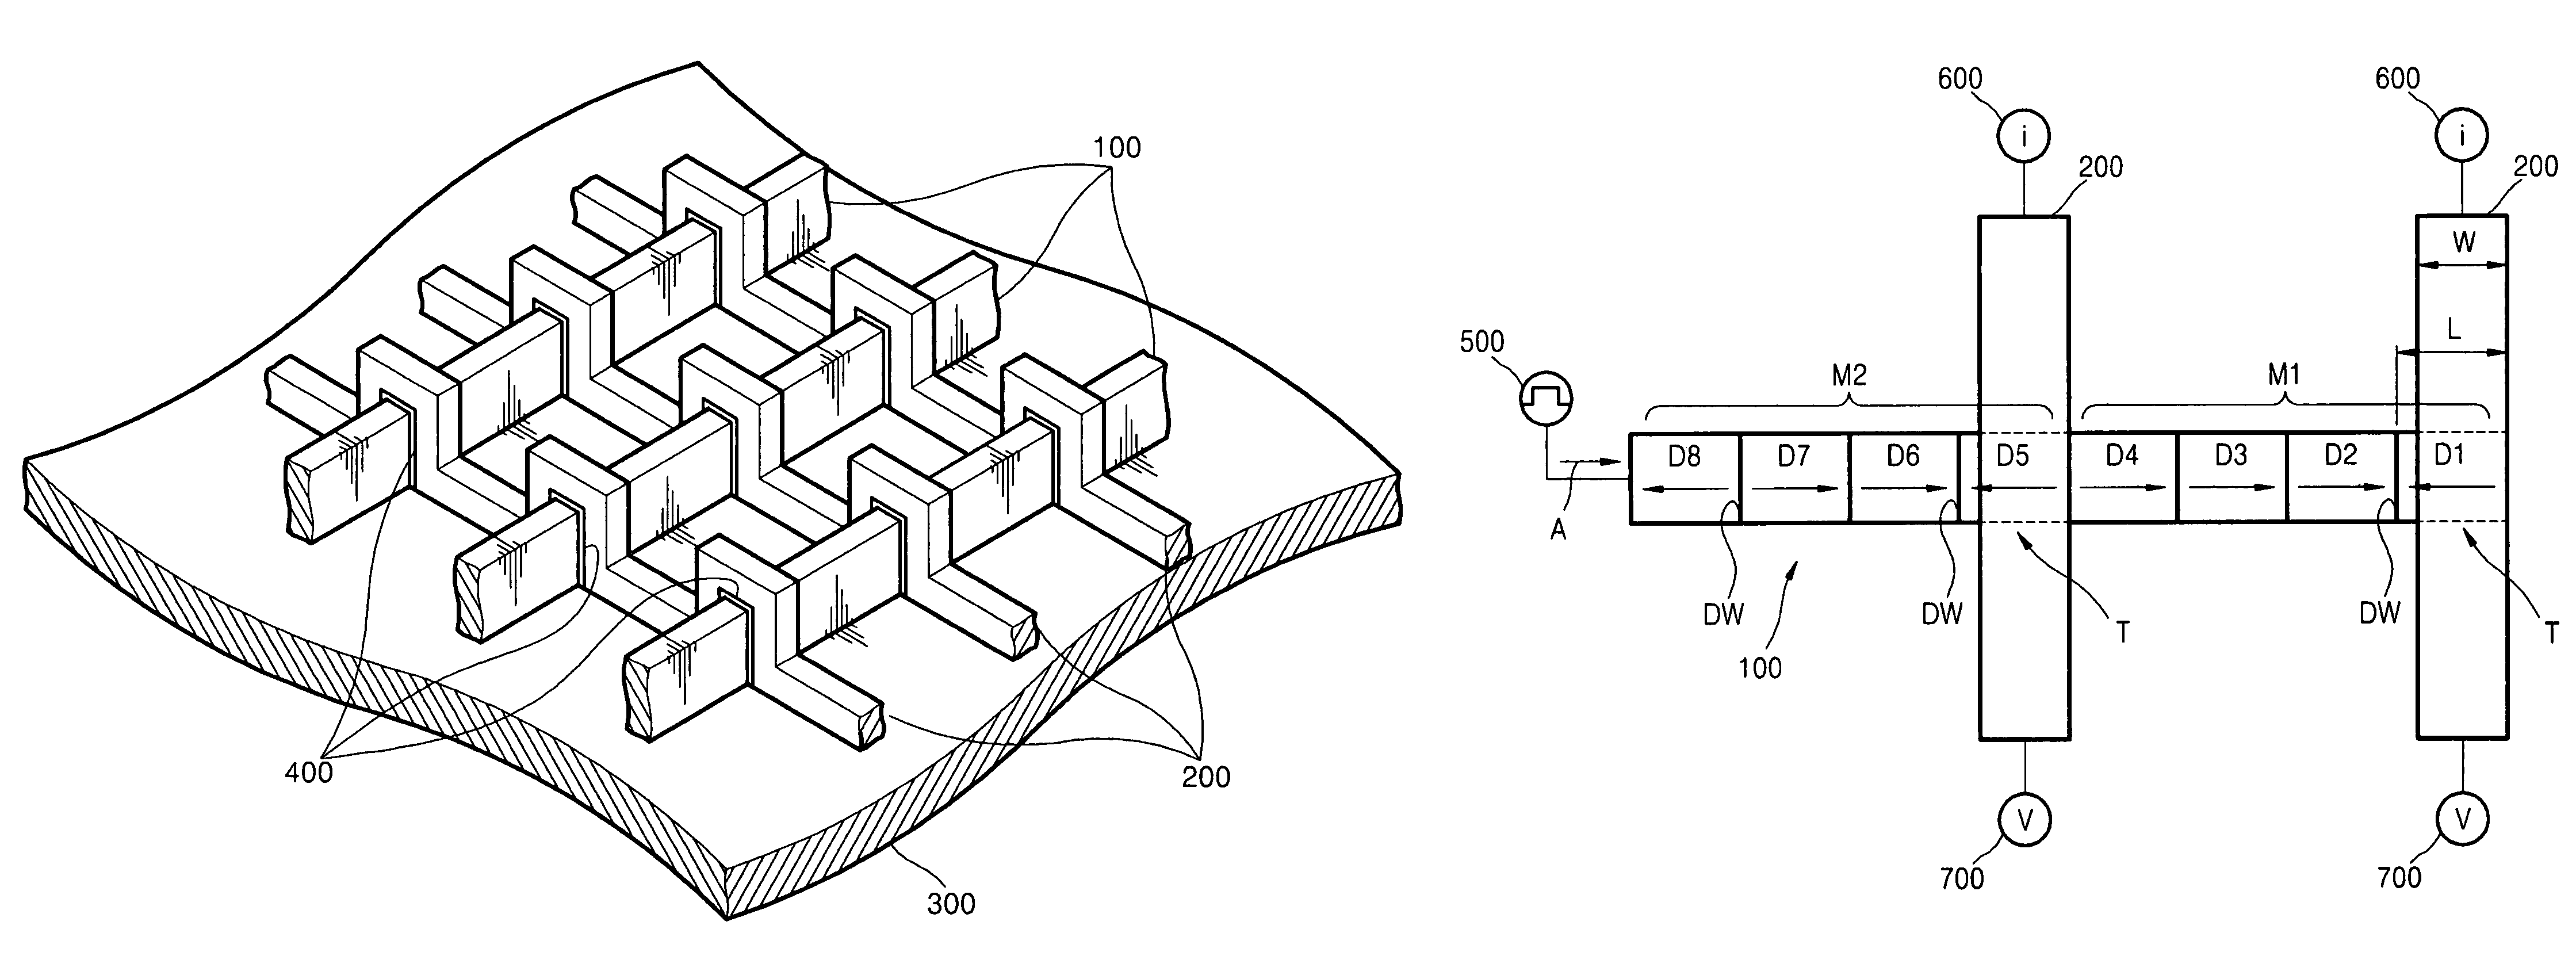 Magnetic memory device with moving magnetic domain walls